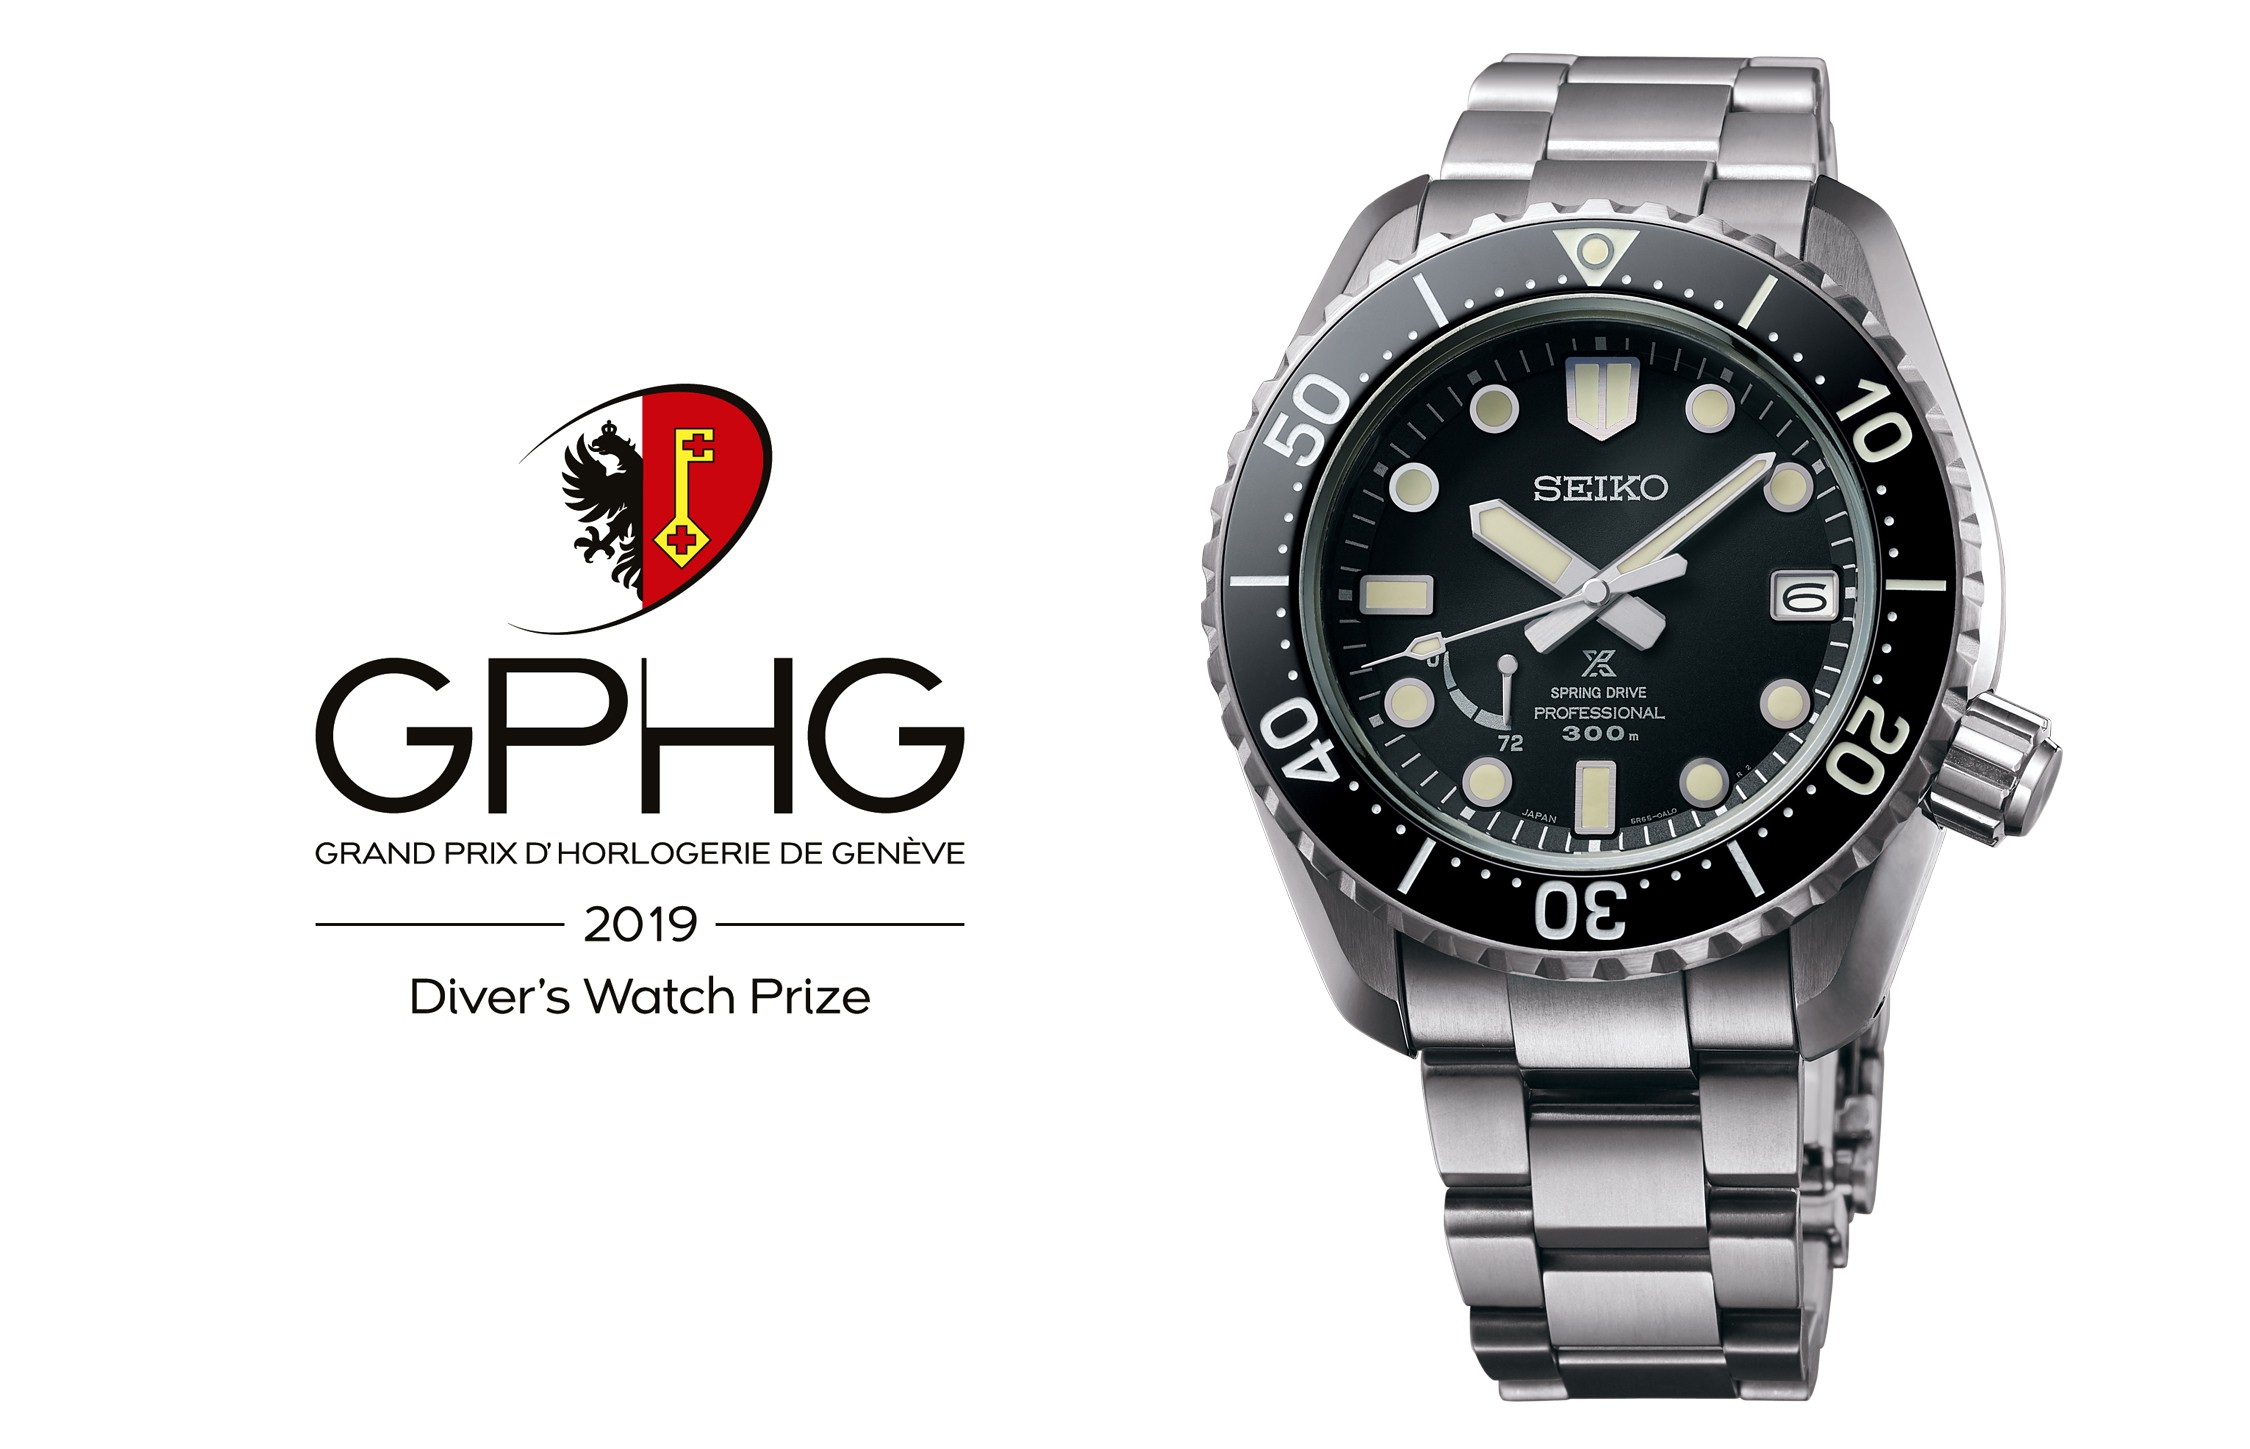 The Seiko Prospex LX Line Diver's wins the Diver's Watch Prize at the 2019  Grand Prix d'Horlogerie de Genève. A consecutive honor for Seiko in the  sports/diver's category. | Seiko Watch Corporation